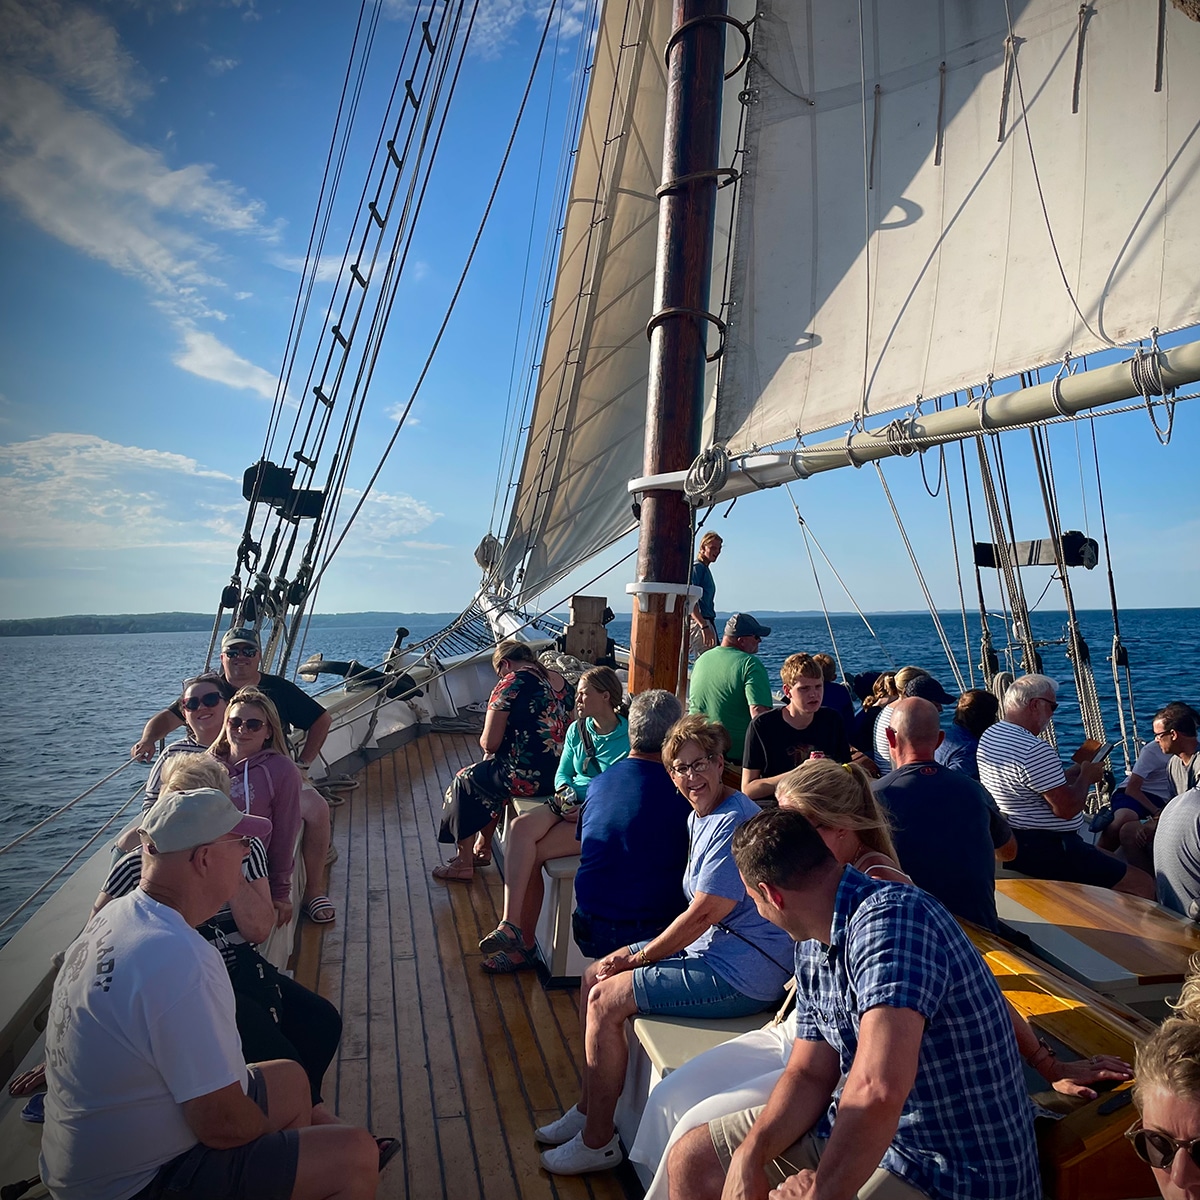 A view from the deck of the Tall Ship Manitou sailboat while sailing in Traverse Bay, Michigan.